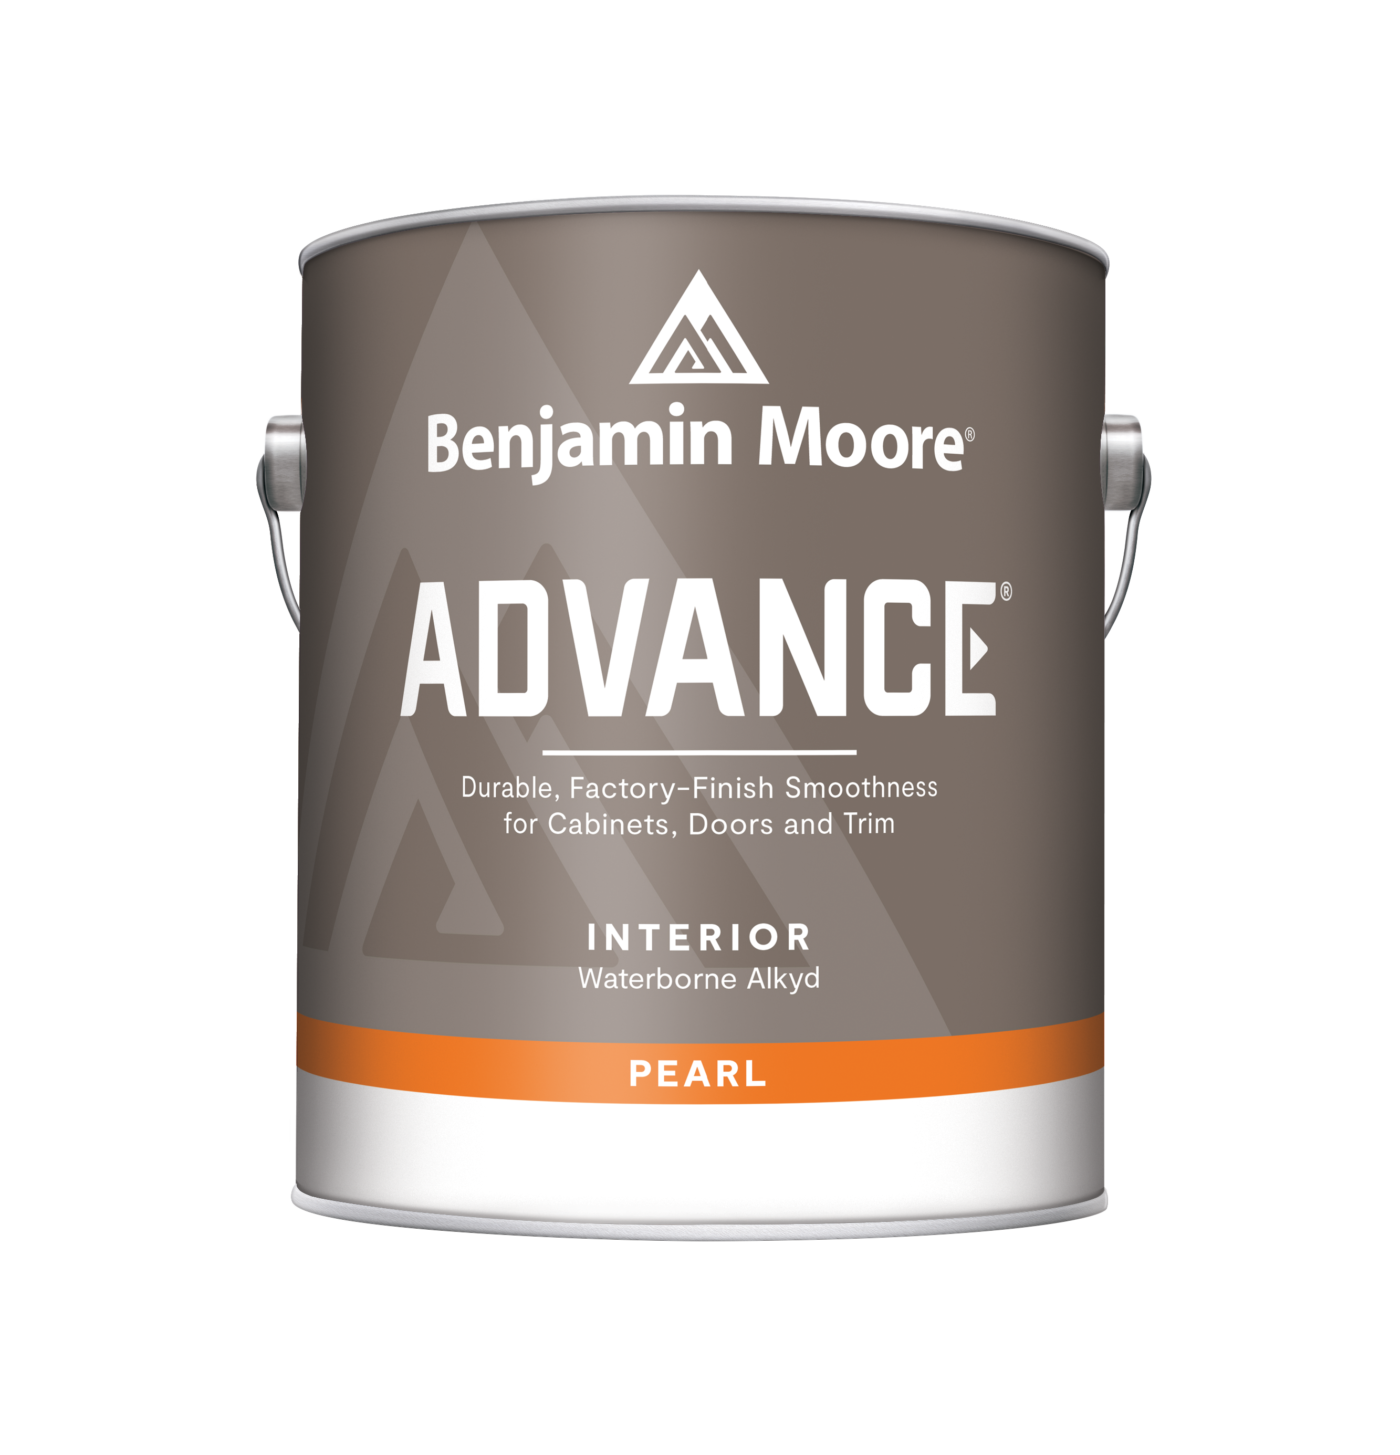 product image for benjamin moore advance interior